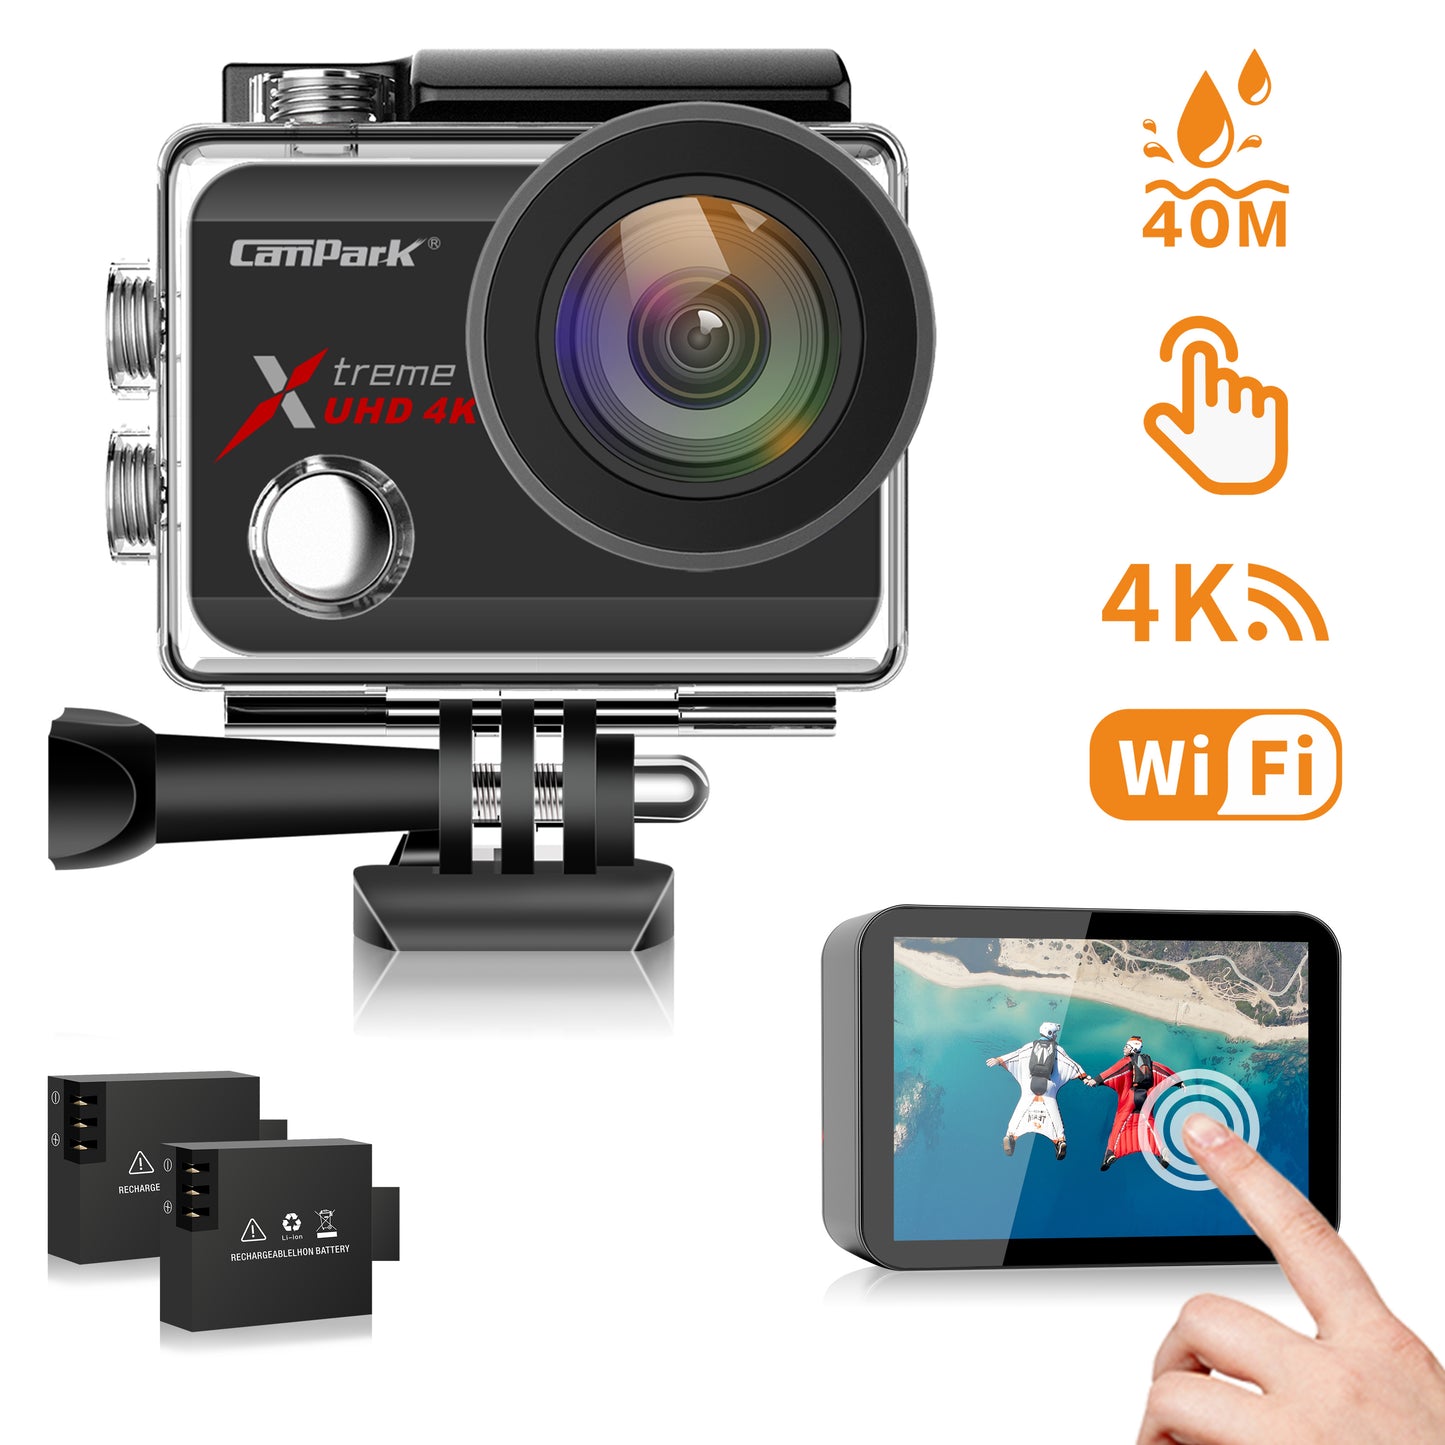 CAMPARK X30A Action Camera 4K 60fps Ultra HD 20MP WiFi EIS Anti-Shake Waterproof 40m Touch Screen Underwater Camera 170° Wide Angle 2 Rechargeable 1350mAh Batteries and Helmet Accessories Kits